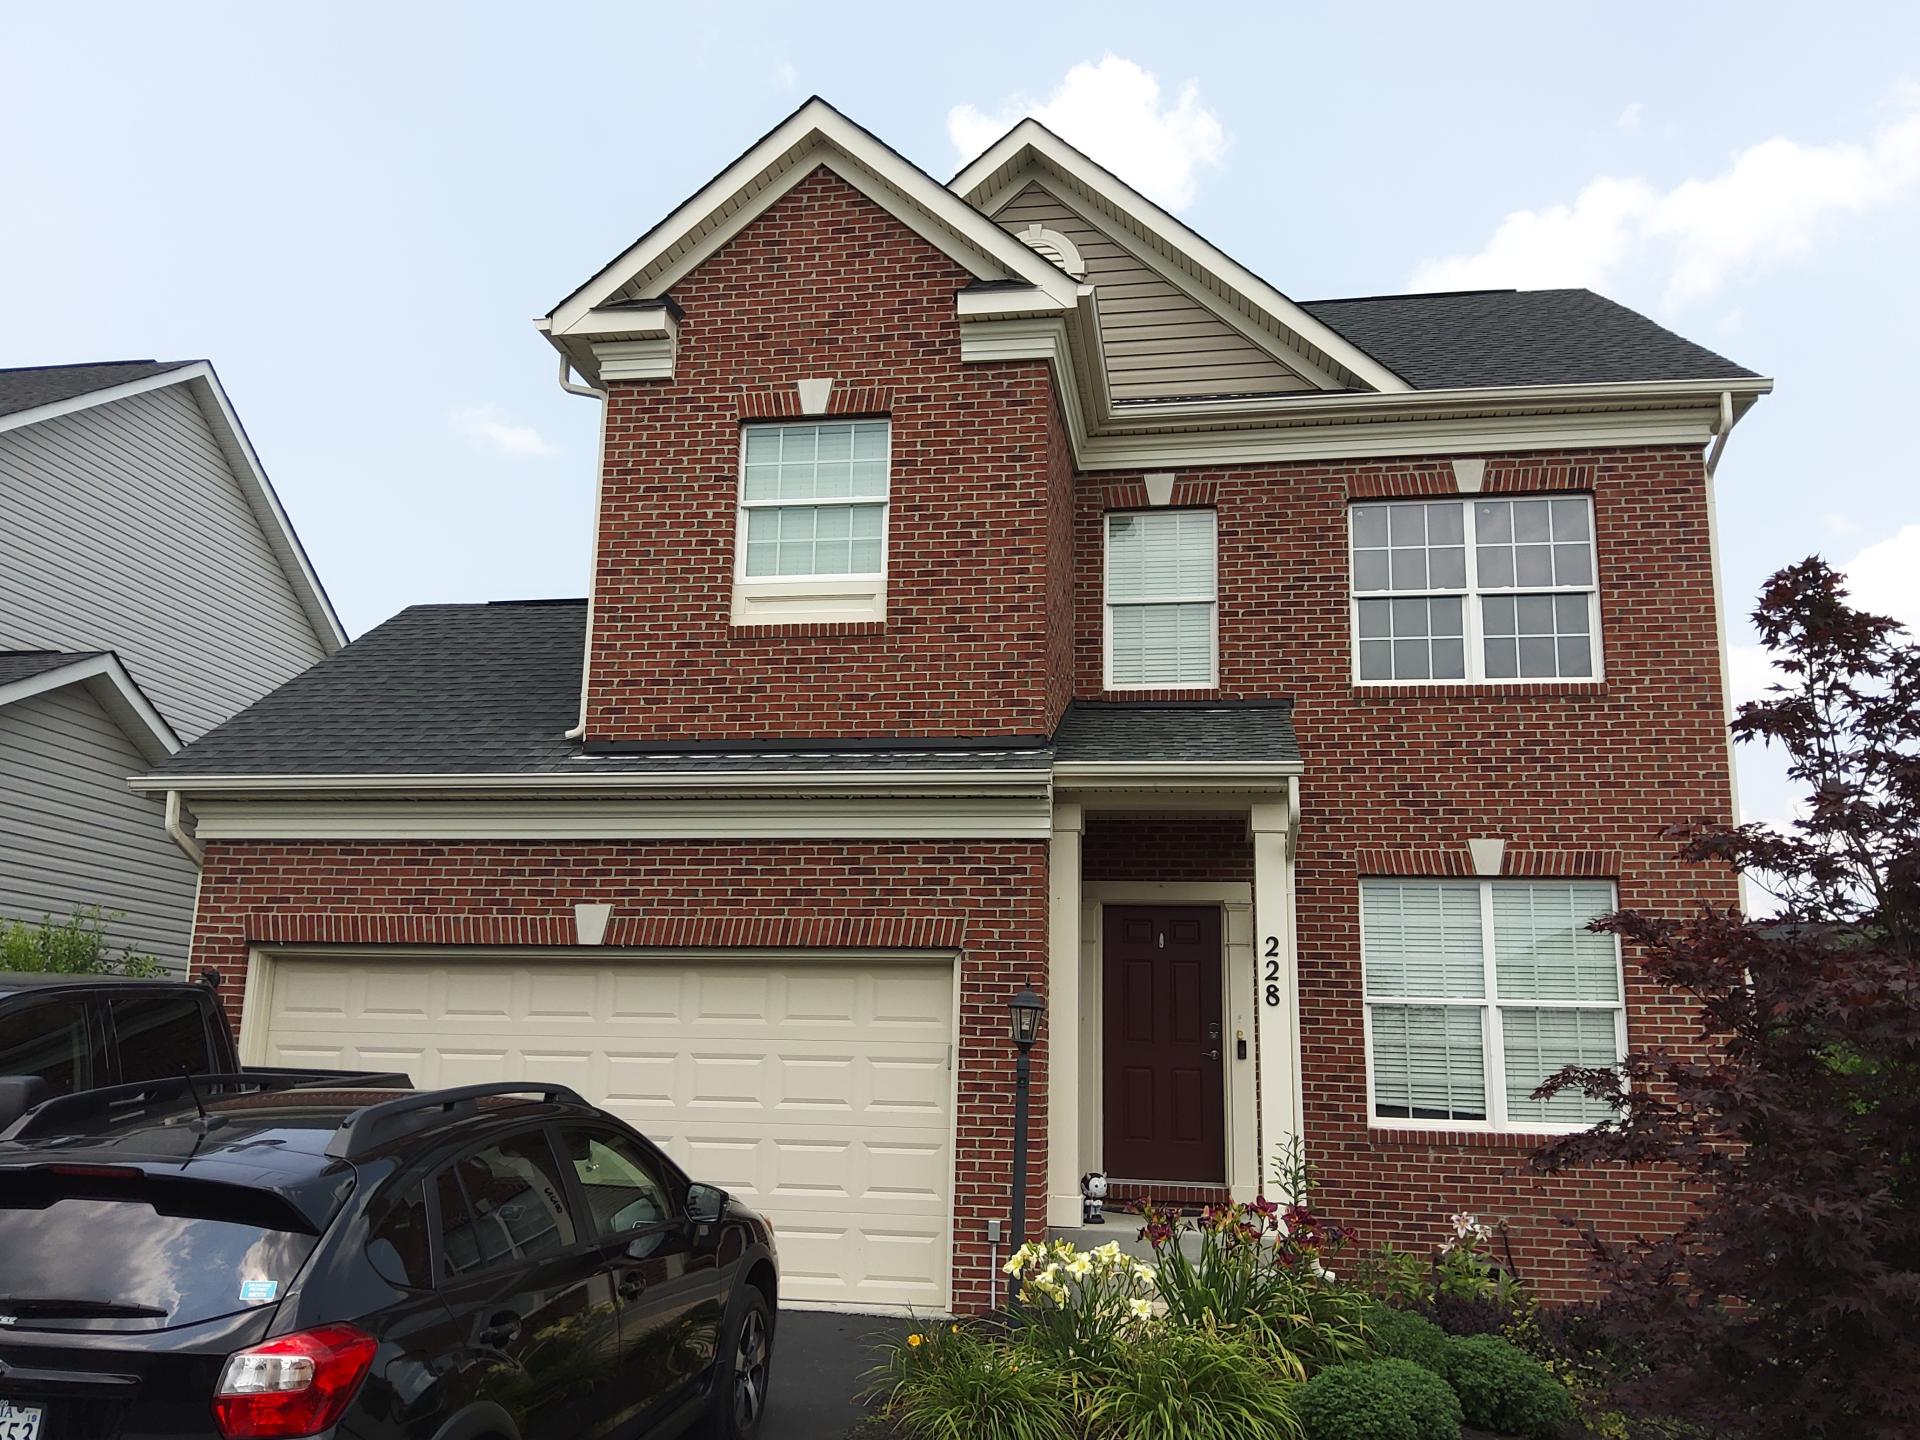 House washing, and windows cleaning in Stephenson, VA Image